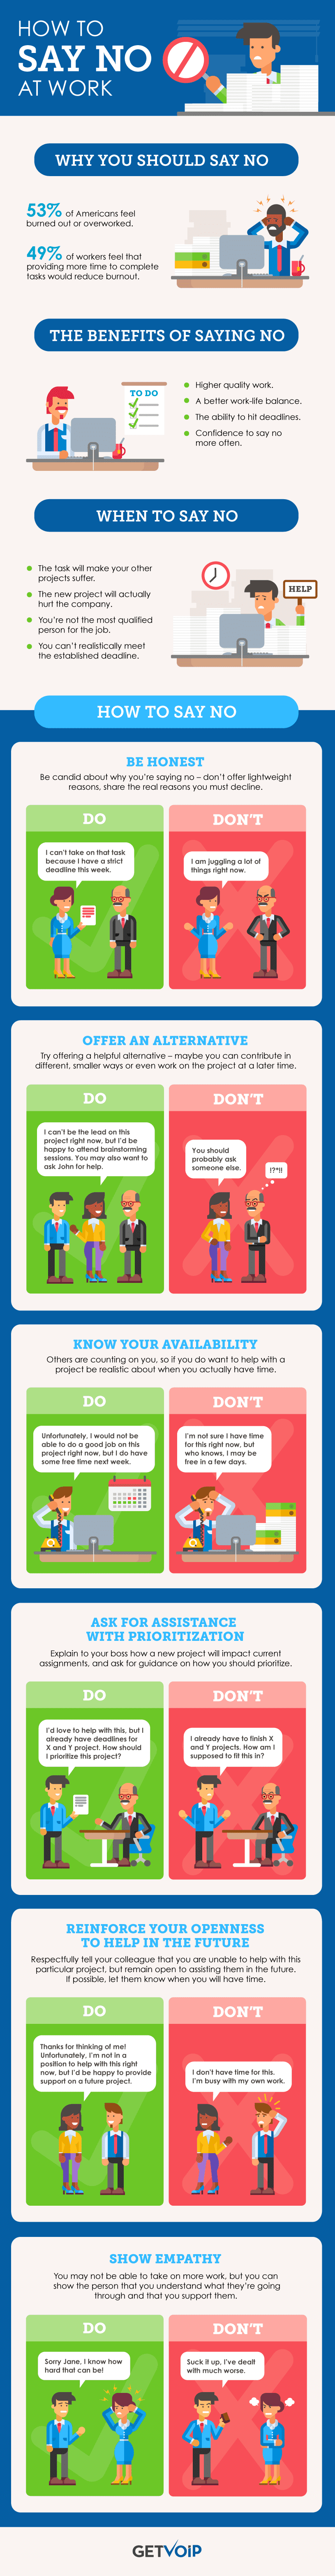 How to Say No Infographic